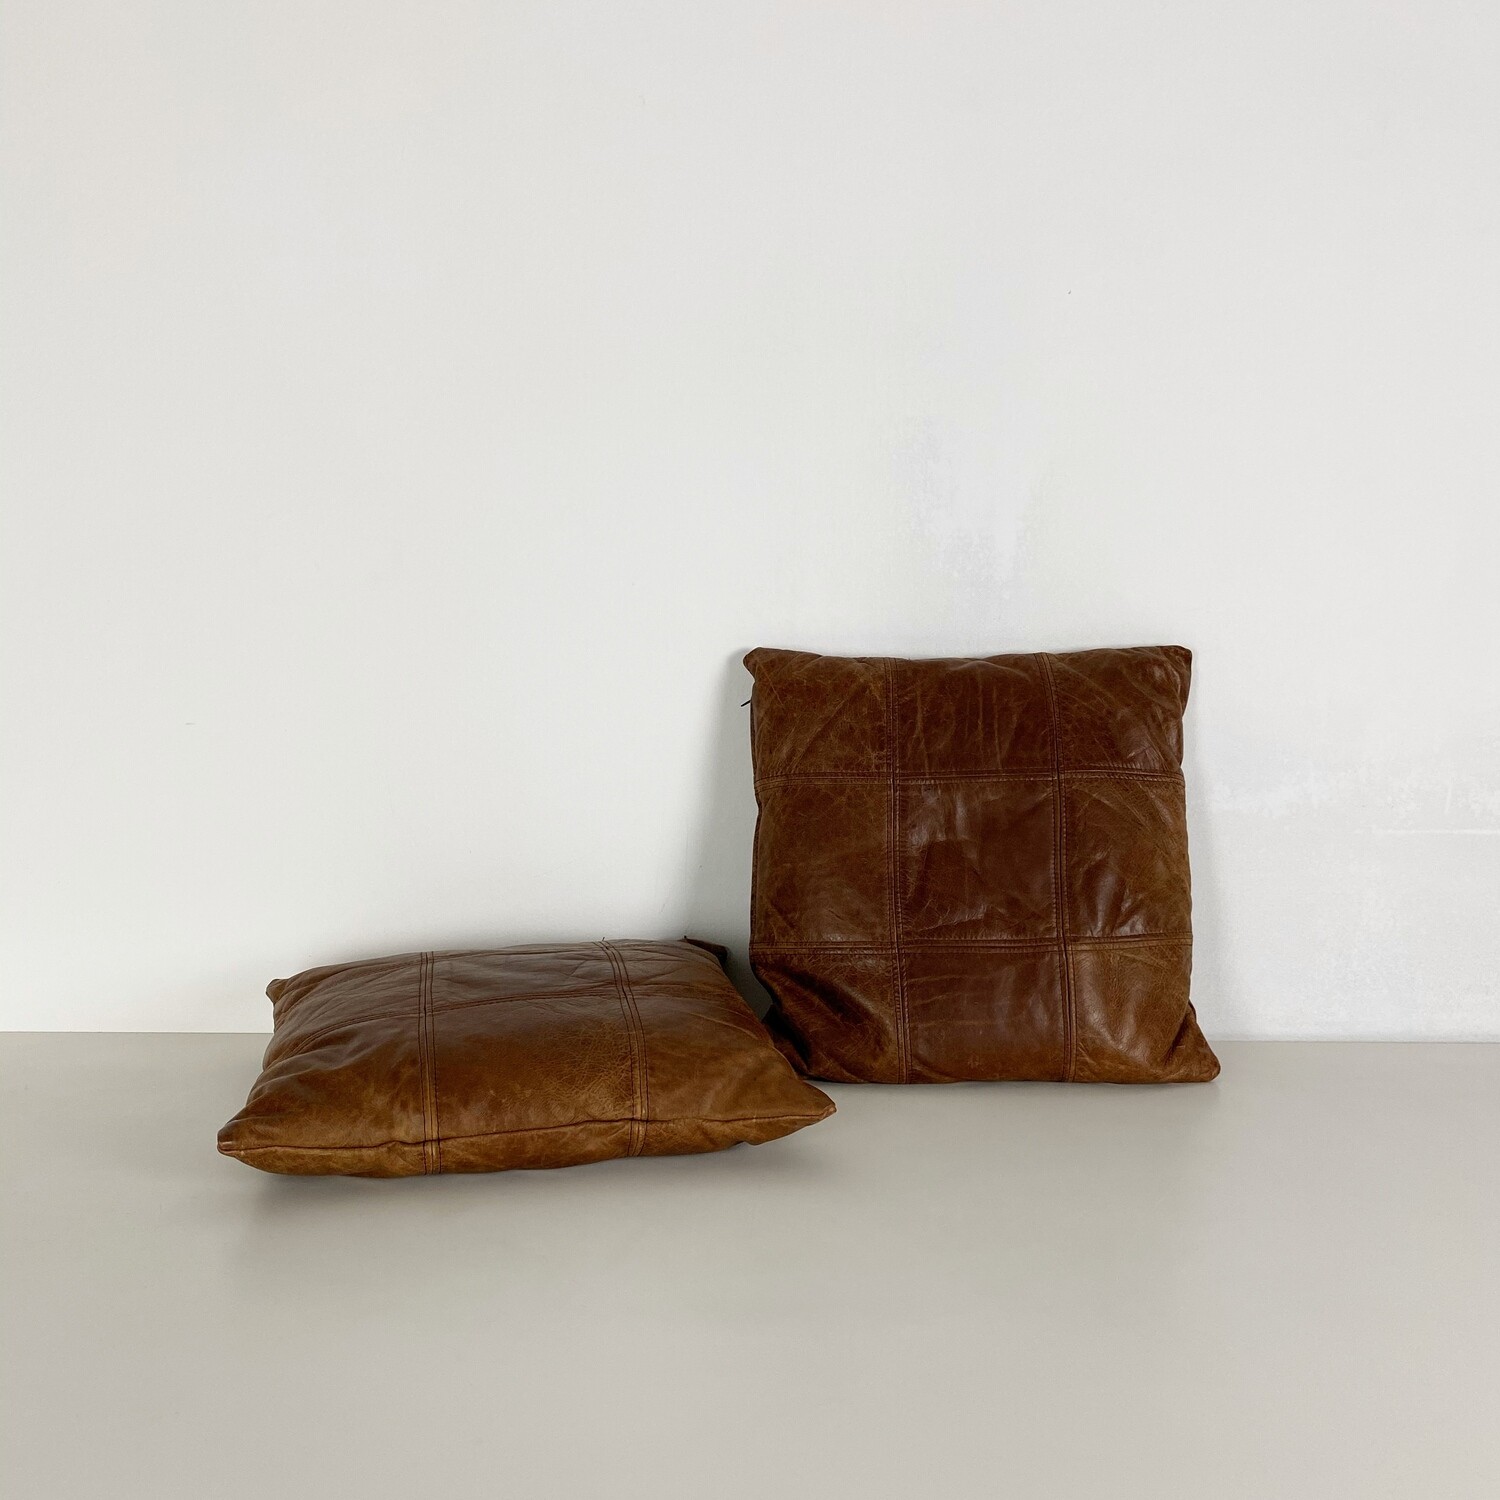 Set of 2 vintage patchwork leather cushions